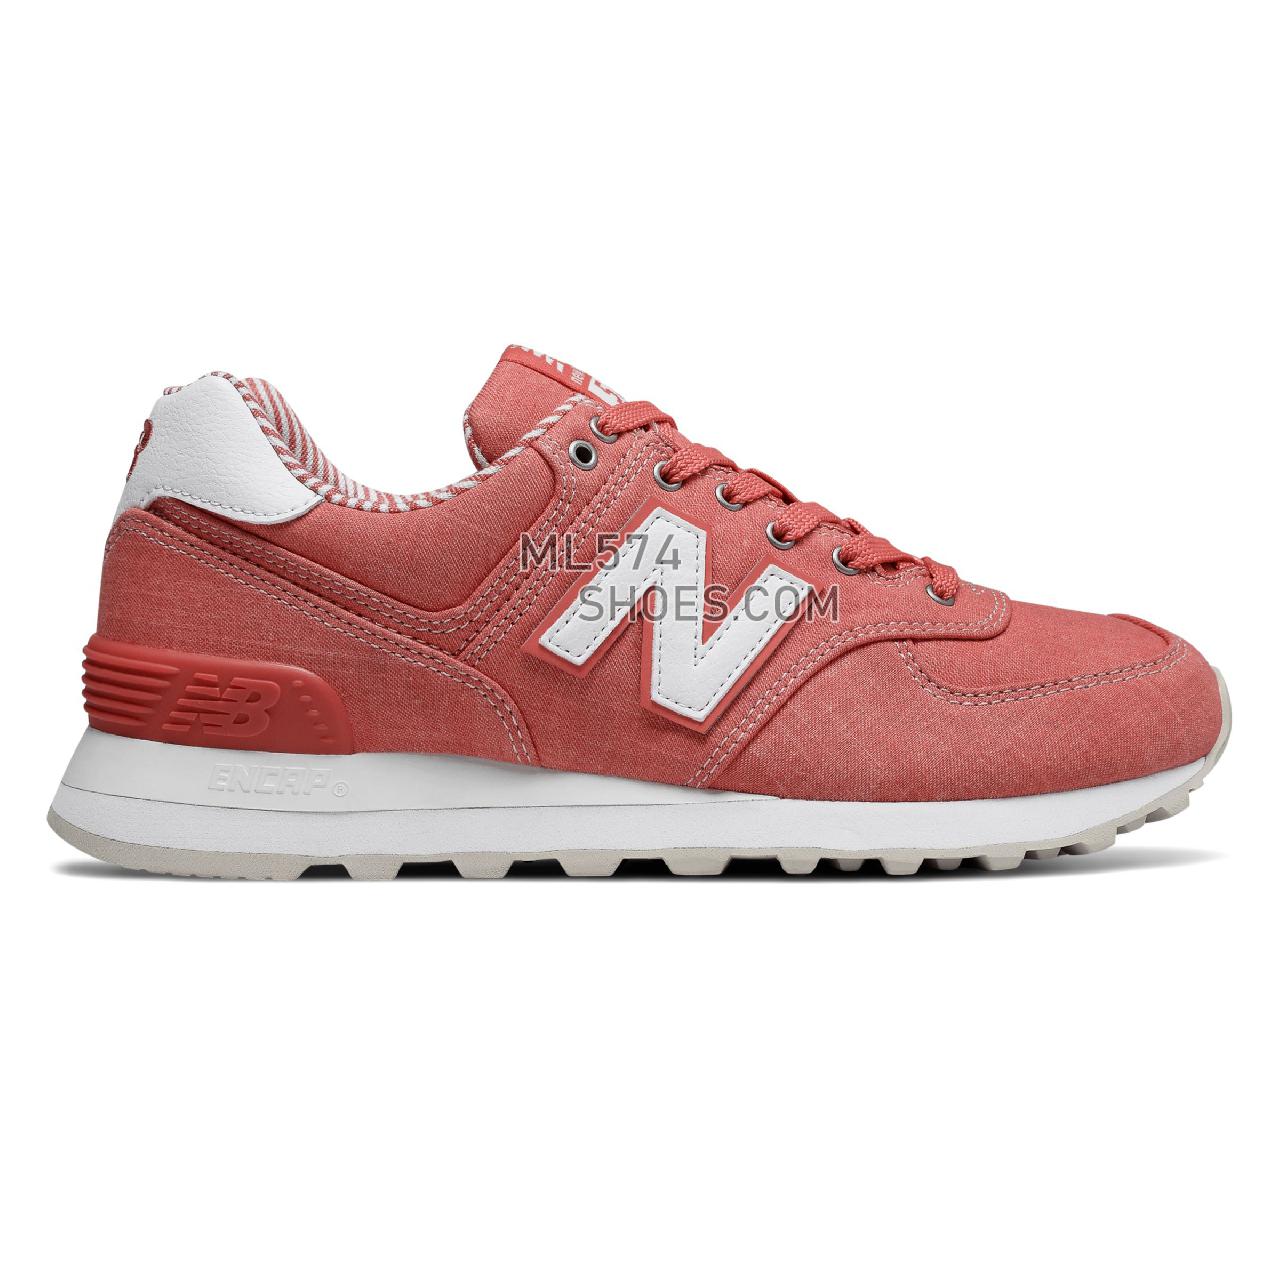 New Balance 574 Beach Chambray - Women's 574 - Classic Coral with White - WL574CHE